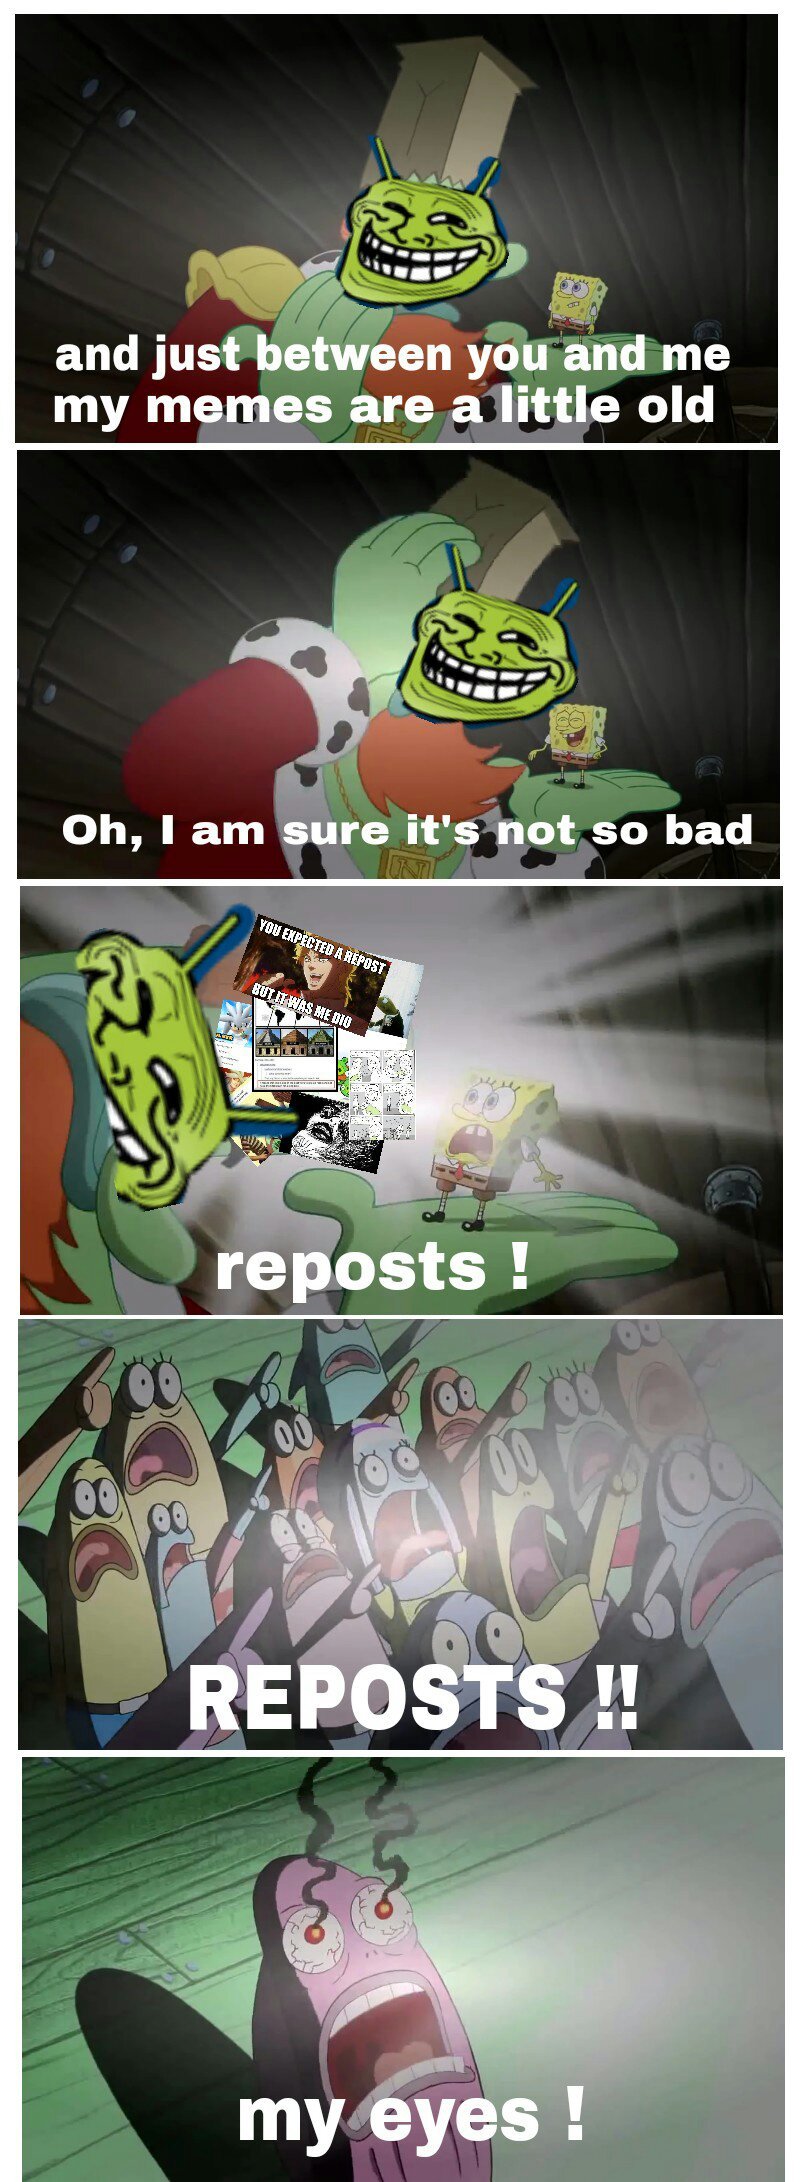 6th comment will be reposted - meme